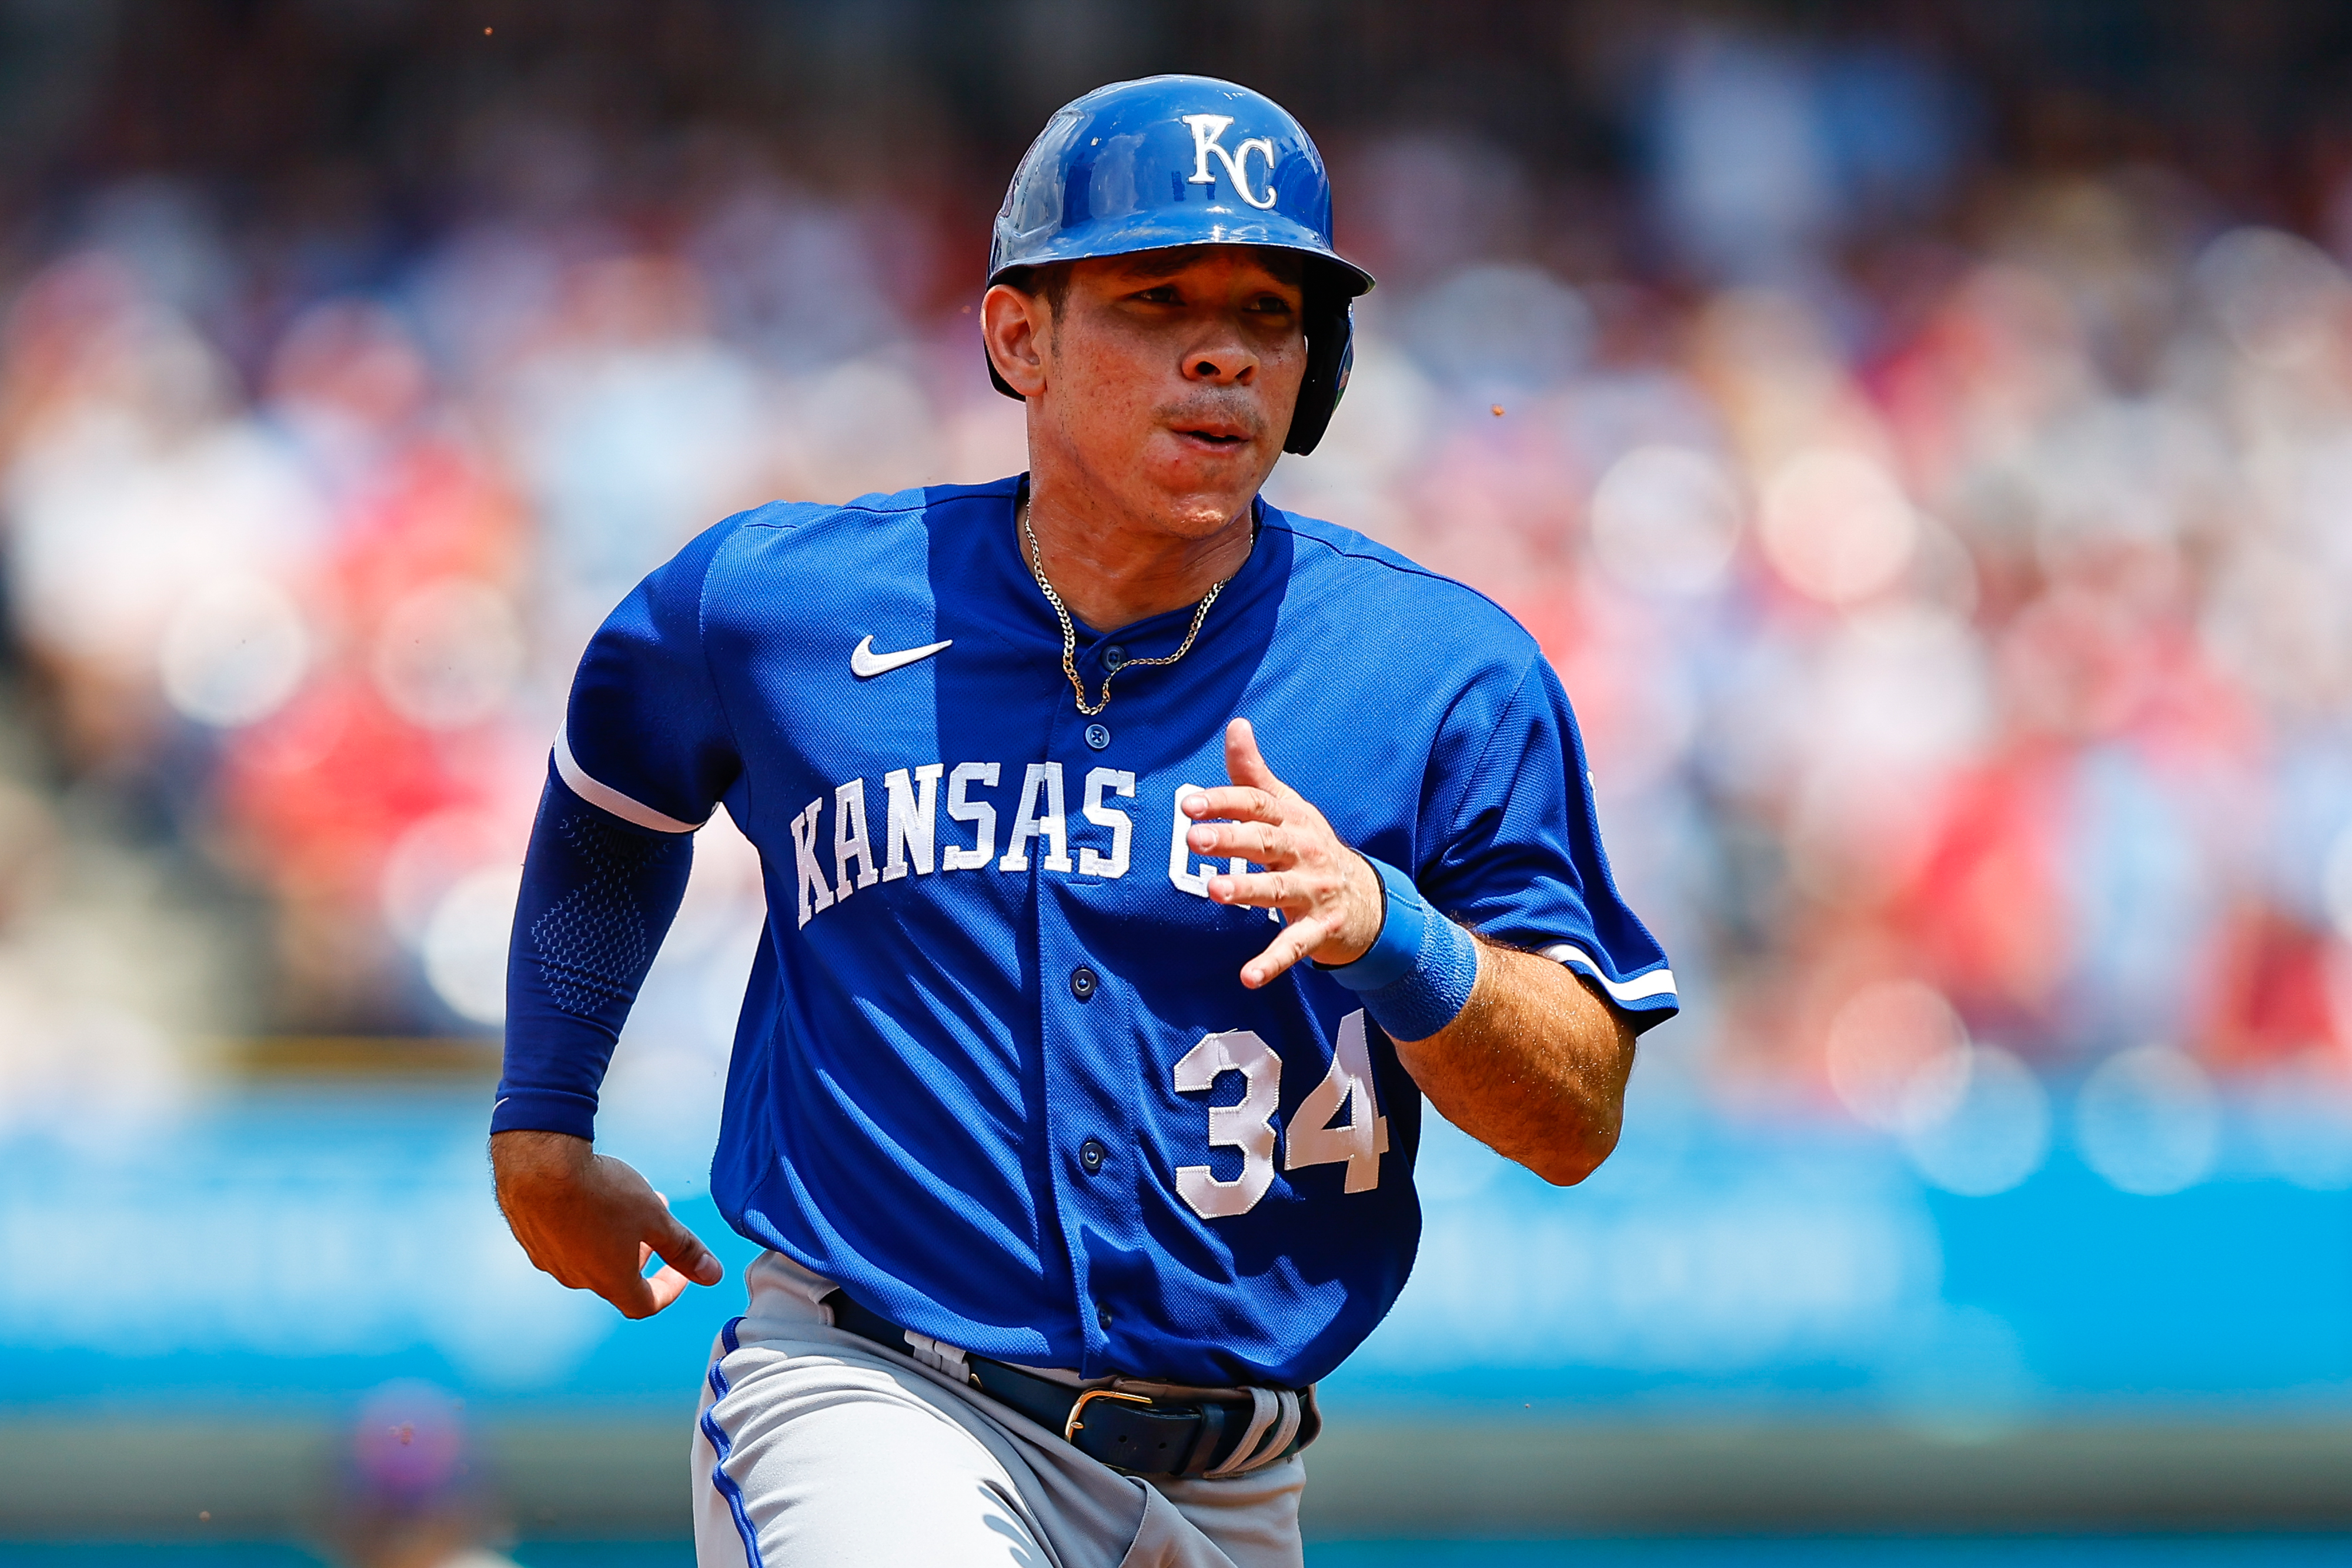 Freddy Fermin #34 of the Kansas City Royals during the game against the Philadelphia Phillies on August 6, 2023 at Citizens Bank Park in Philadelphia, Pennsylvania.